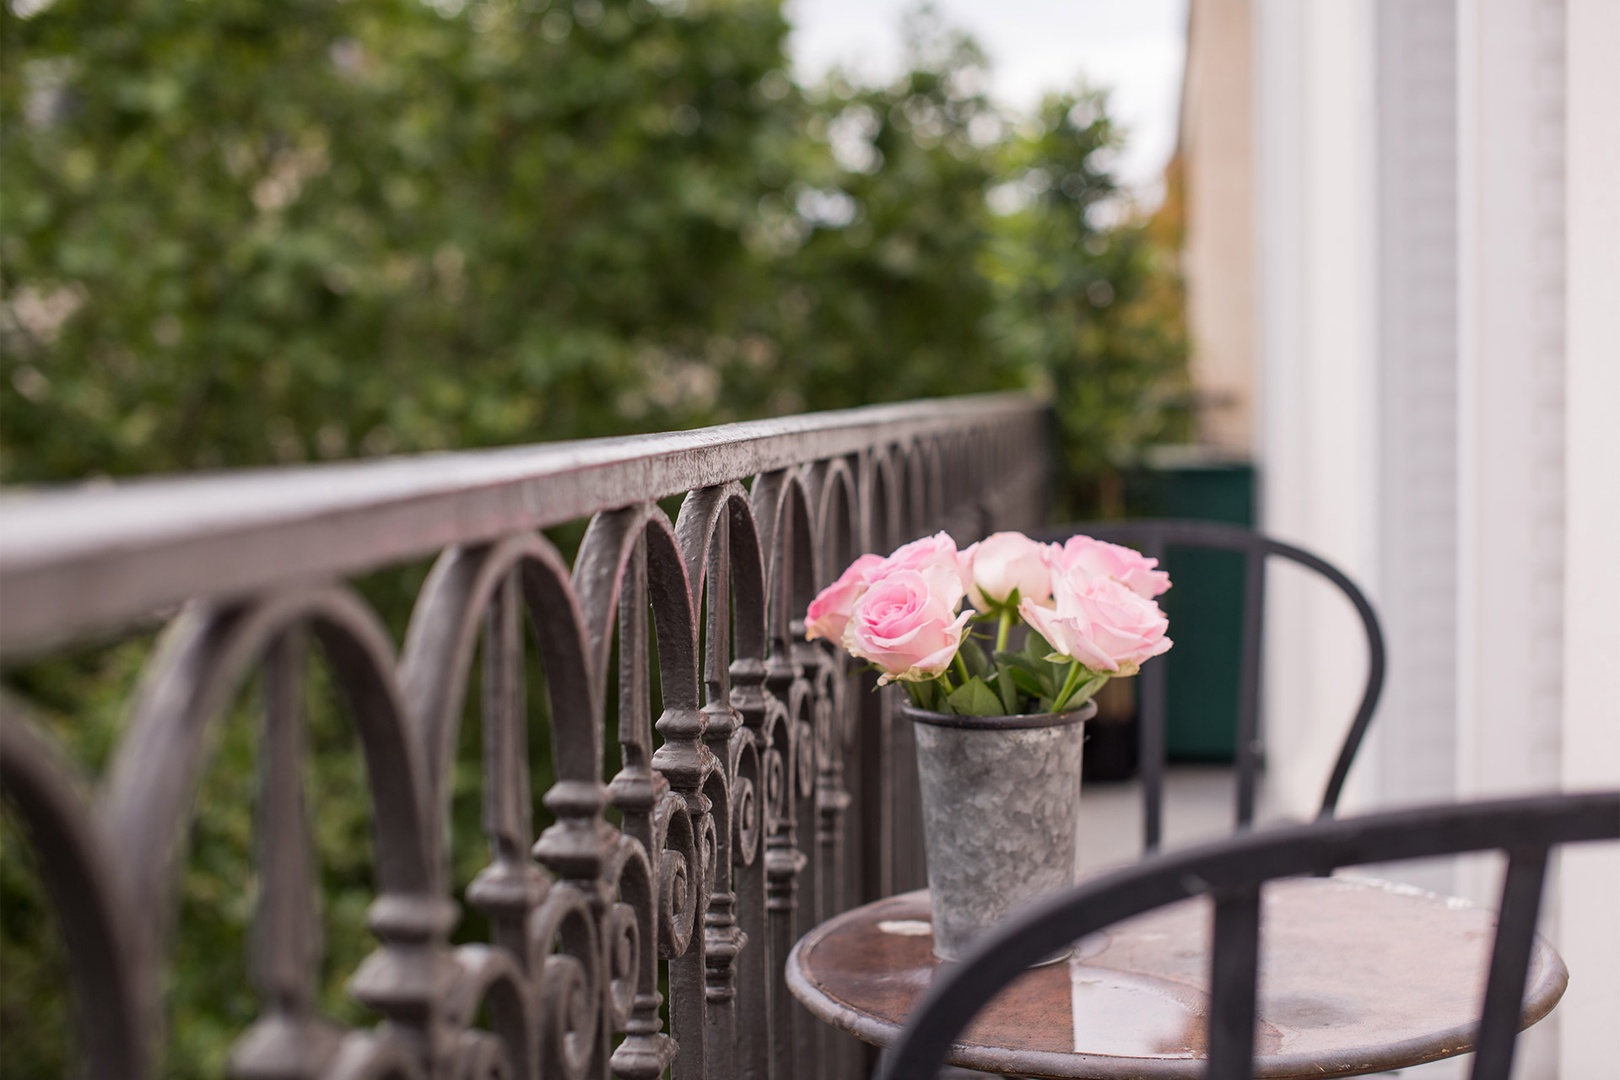 Relax with a book on the sunny and private balcony.